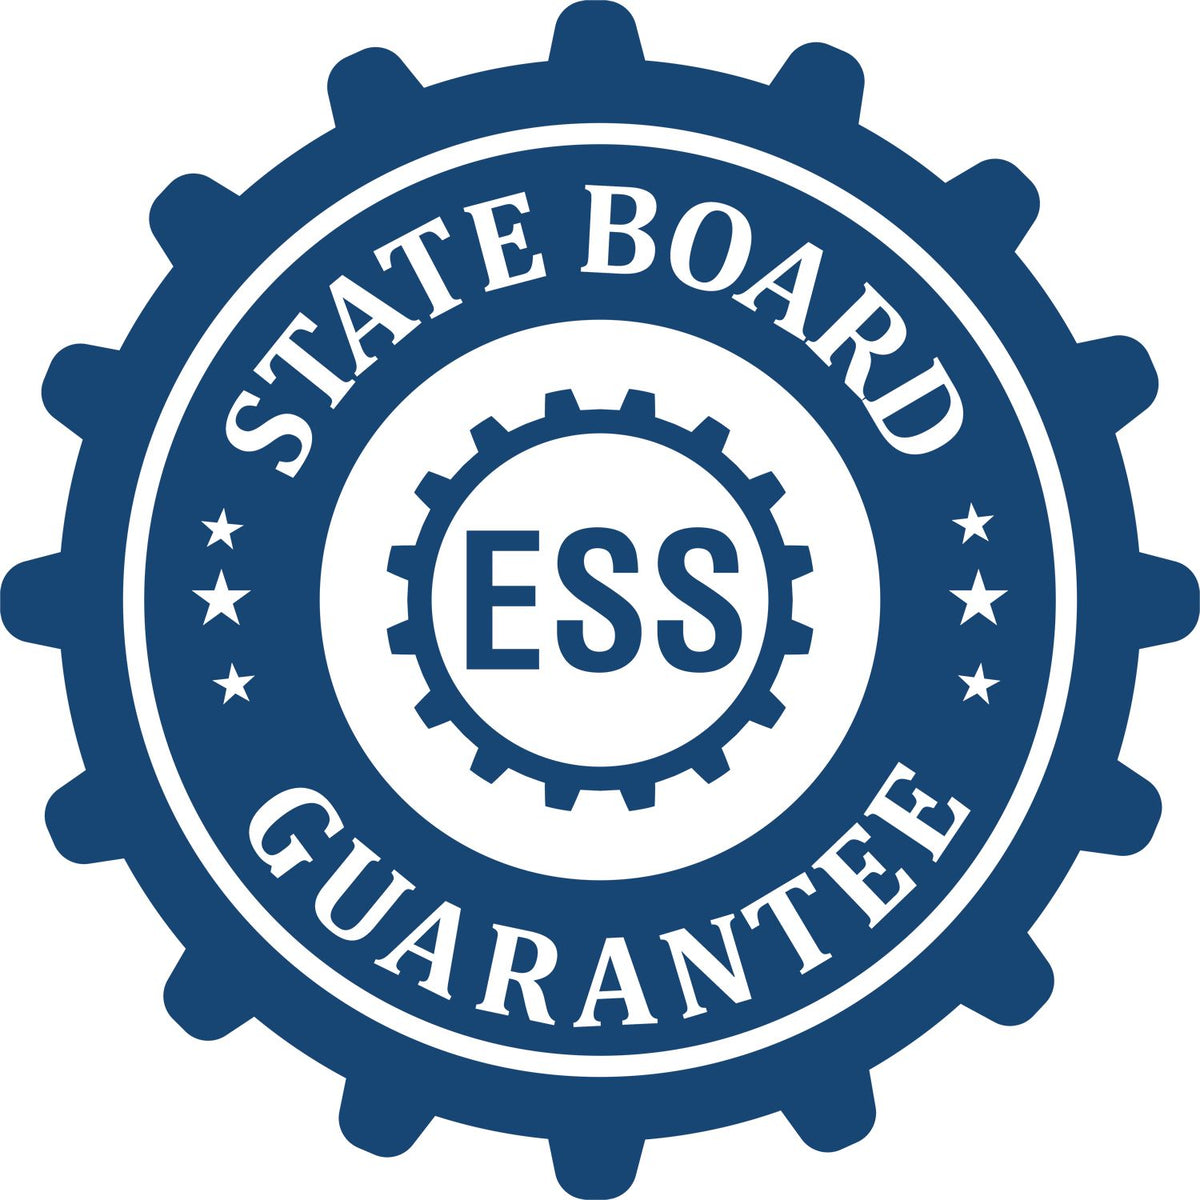 An emblem in a gear shape illustrating a state board guarantee for the Maine Professional Engineer Seal Stamp product.